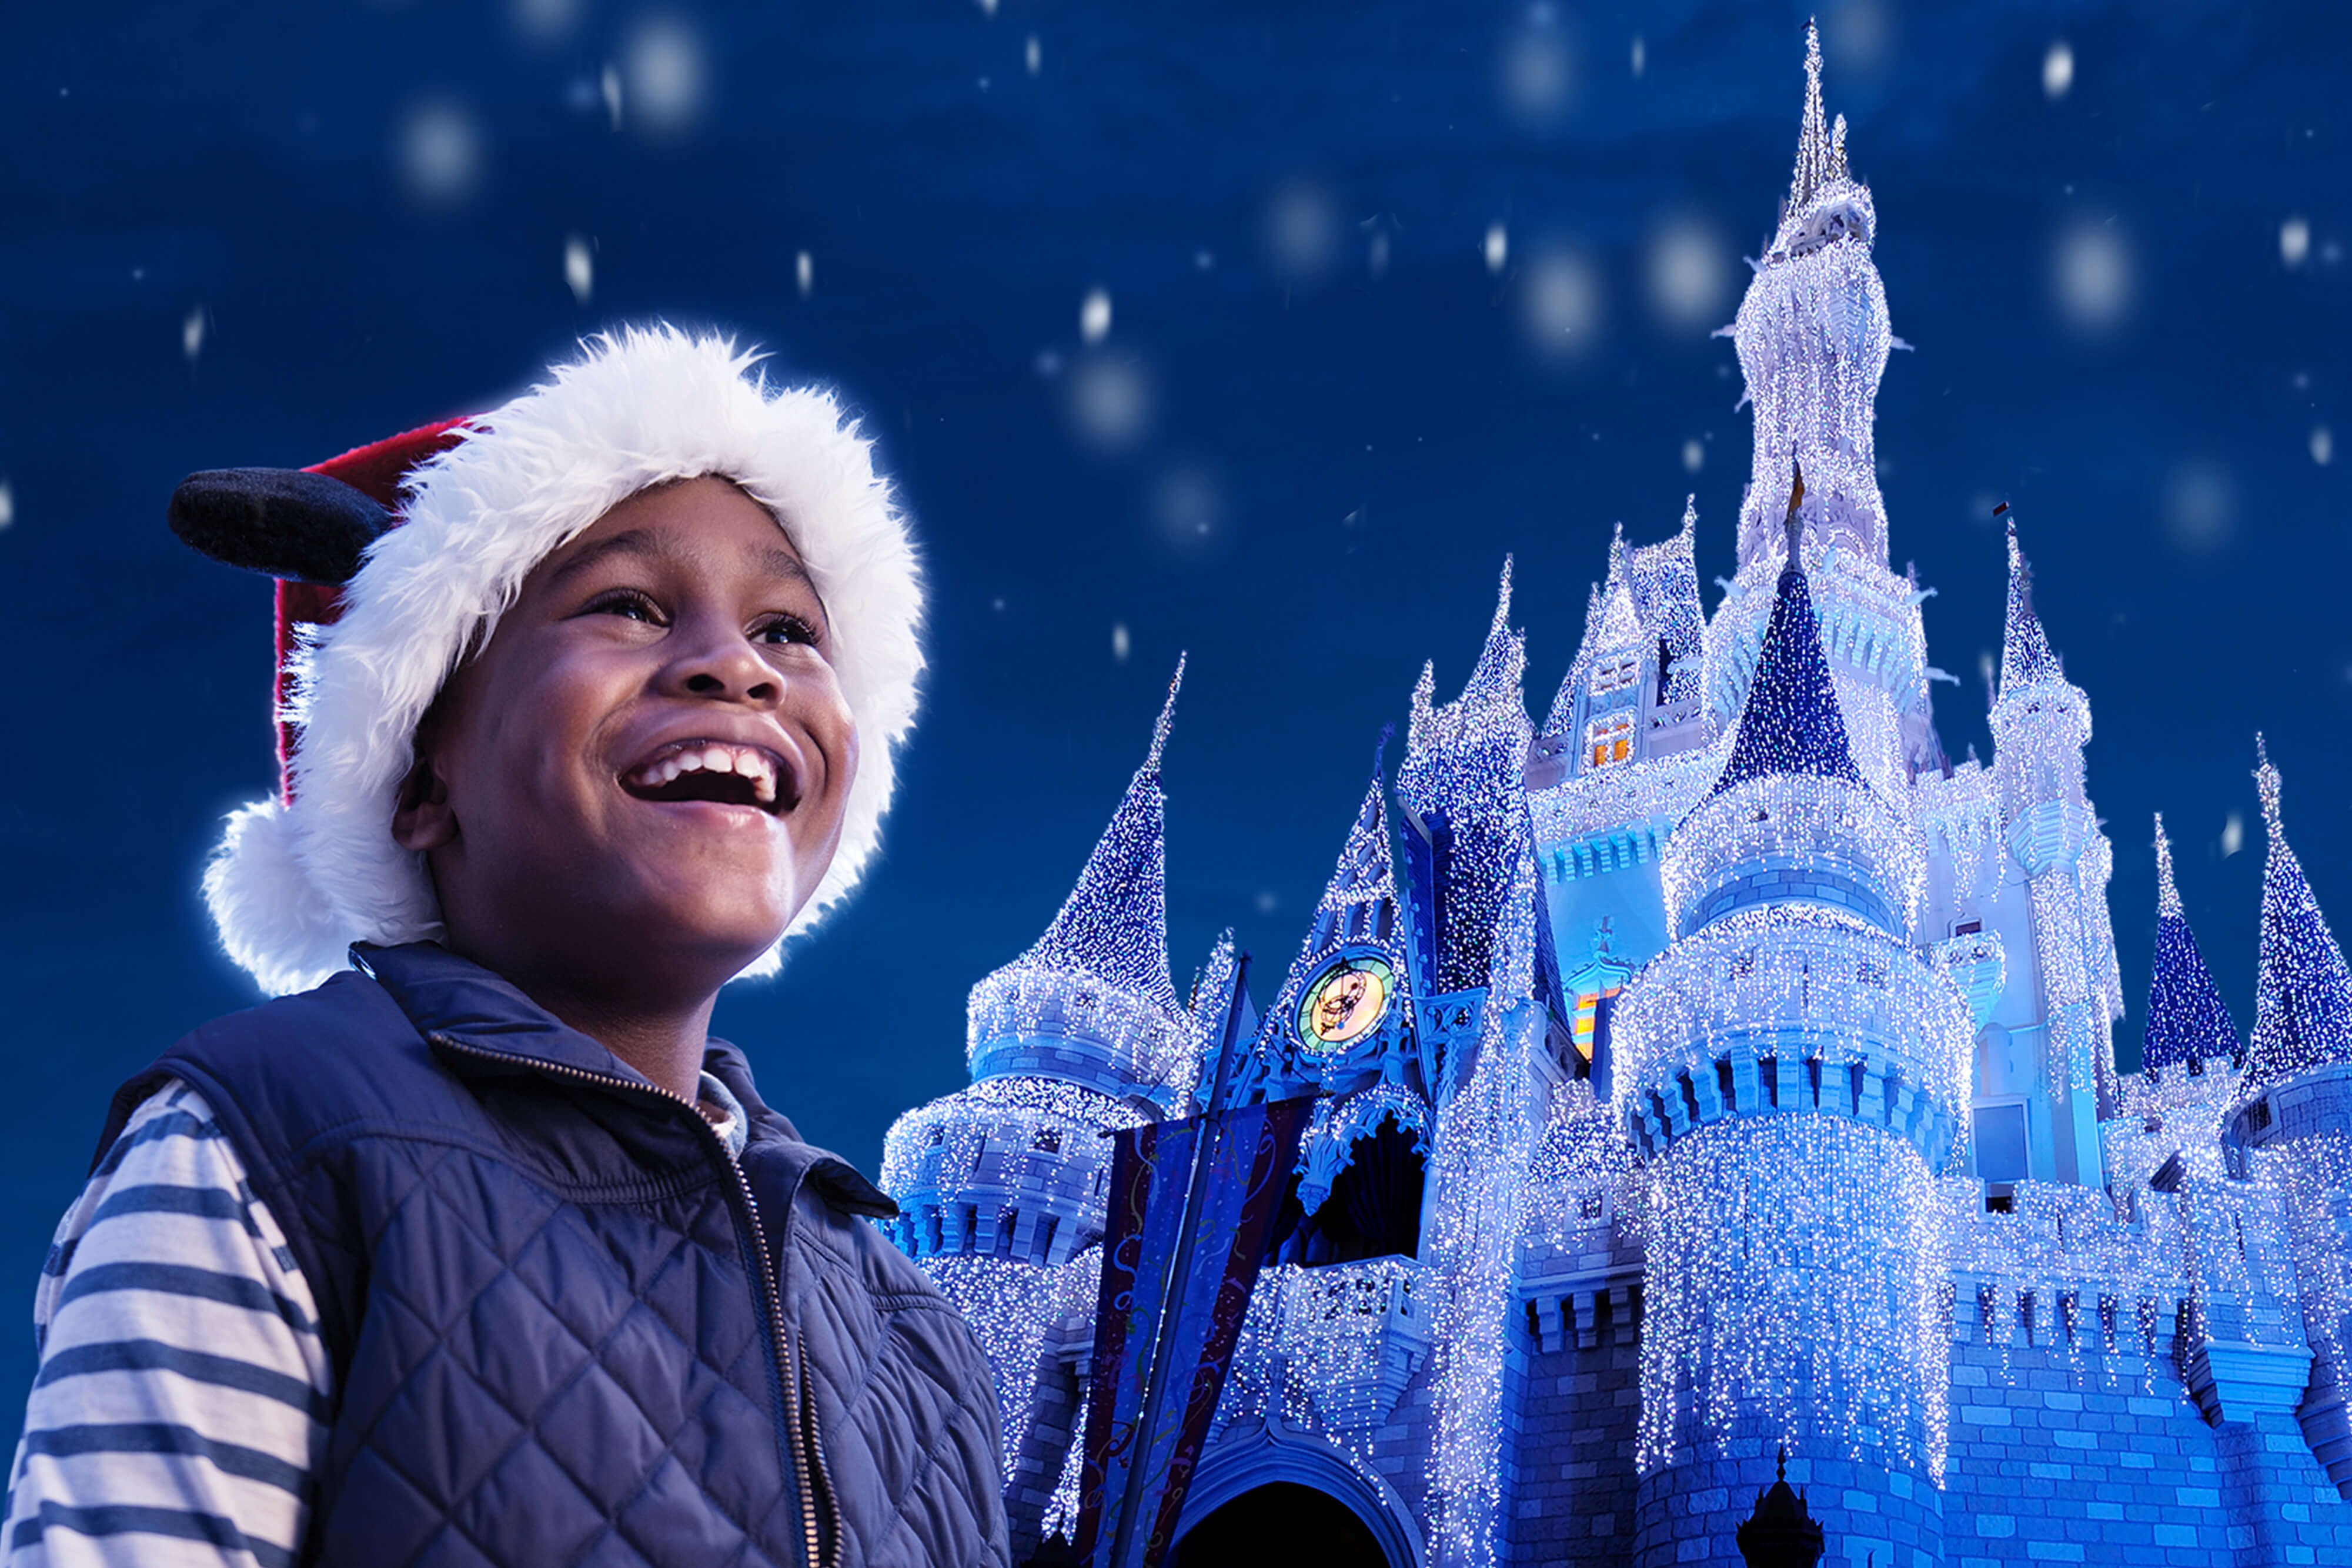 A Smiling Child Enjoys a Magical Disney Holiday | Westgate Resorts